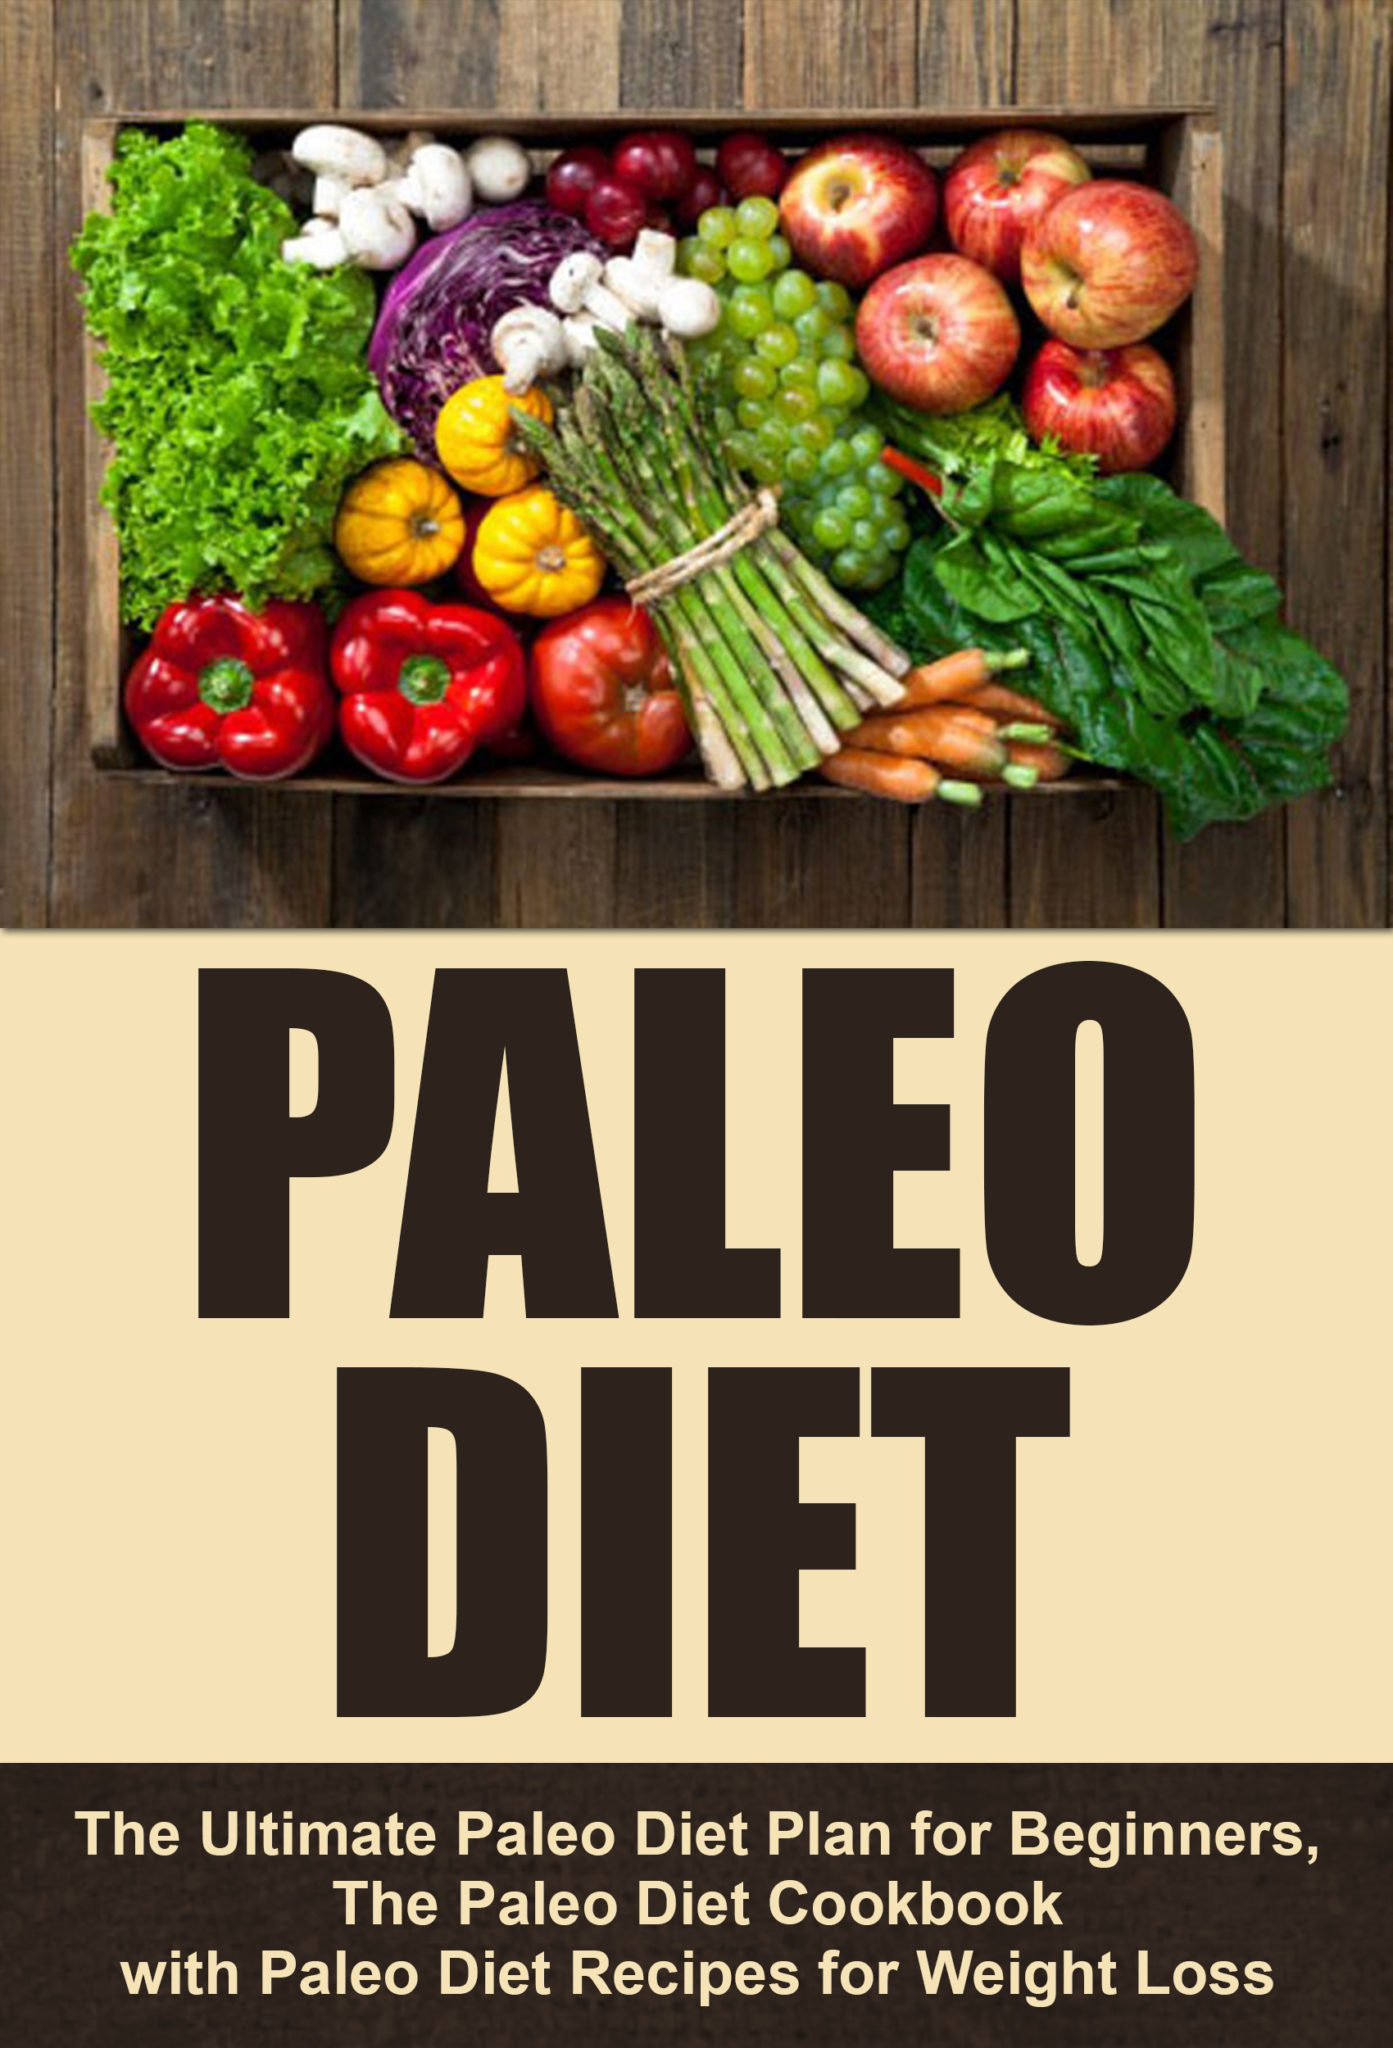 FREE: Paleo Diet: The Ultimate Paleo Diet Plan for Beginners, The Paleo Diet Cookbook with Paleo Diet Recipes for Weight Loss by Dr. Richard Shullman